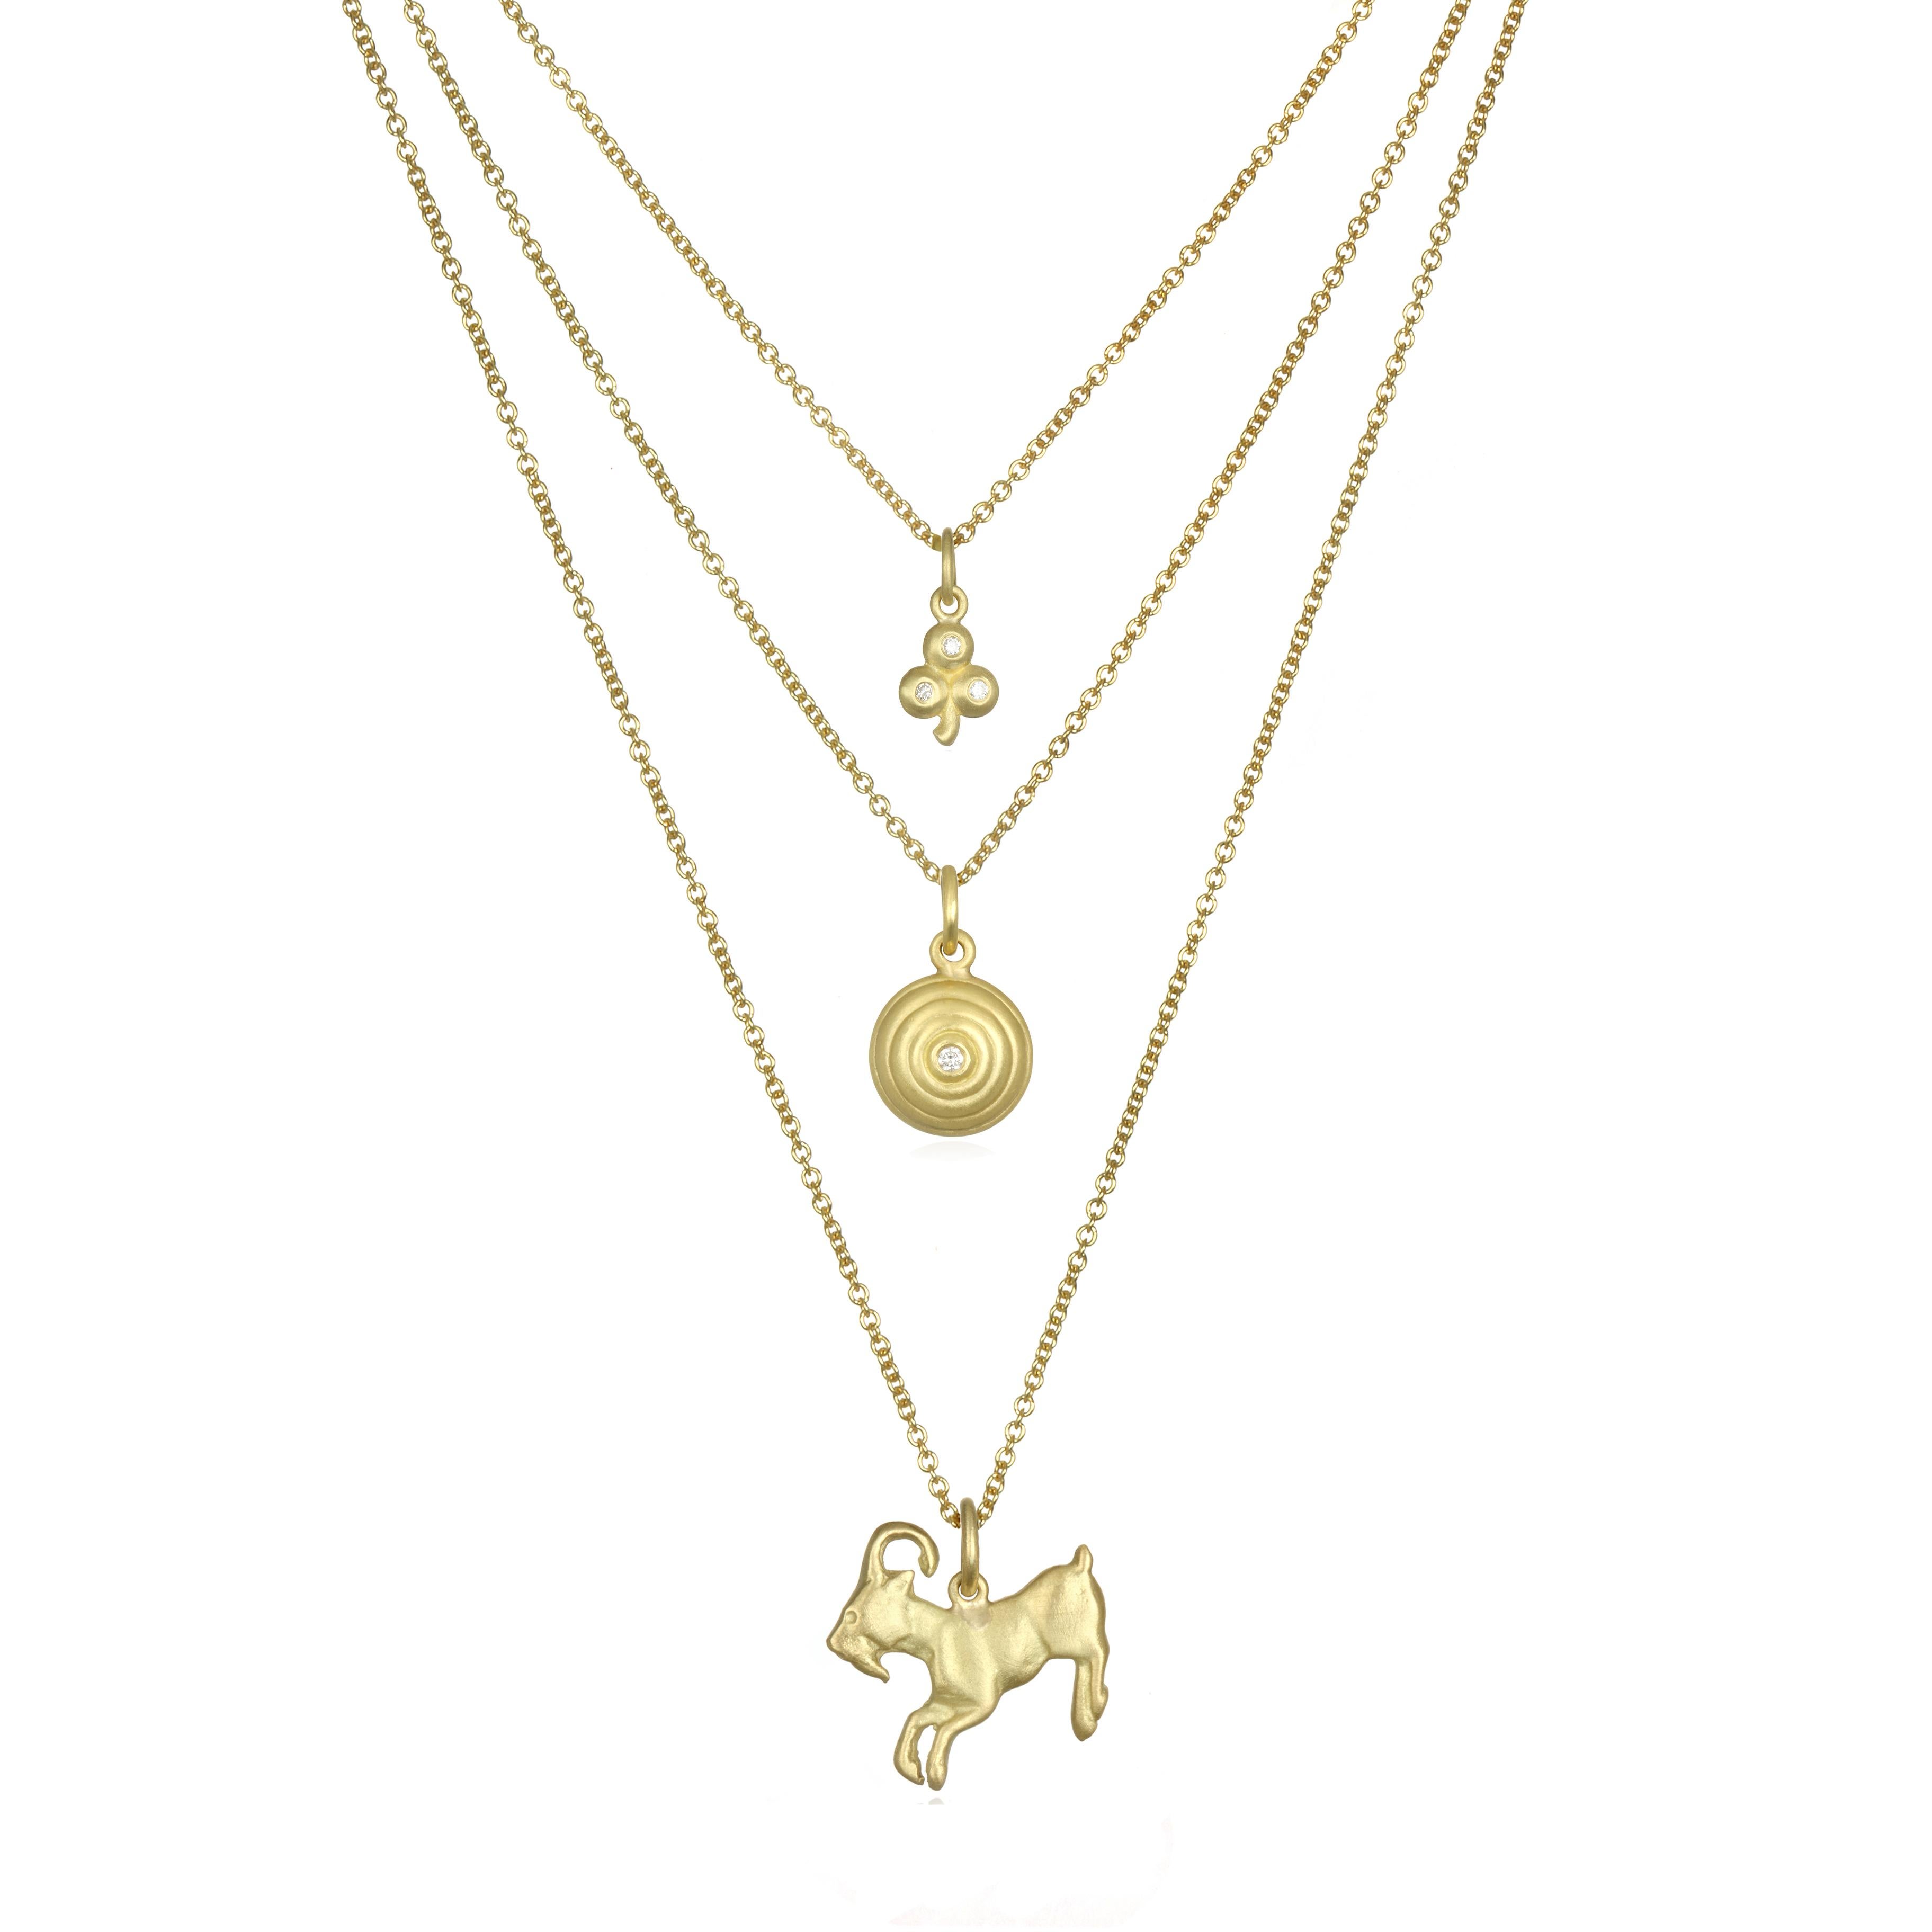 For determination, health and vitality - this Goat charm is crafted in 18K gold*. The cable chain is 16-18